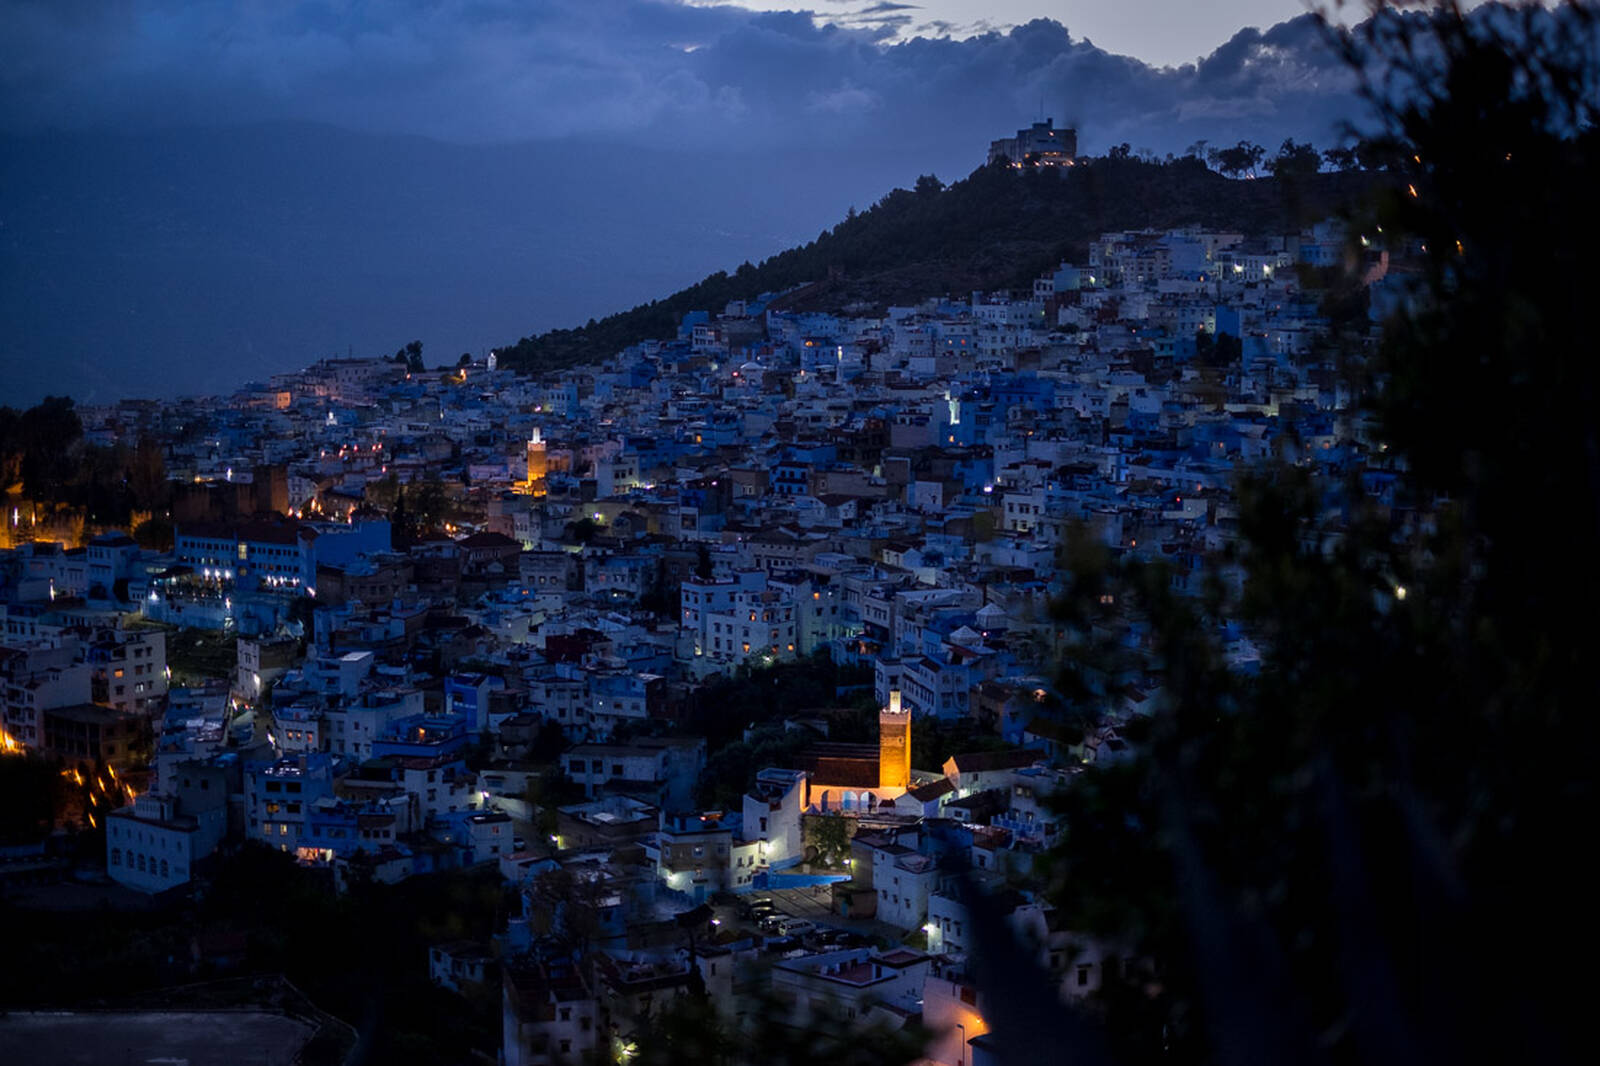 Image of Spanish Mosque at Chefchaouen by Darlene Hildebrandt